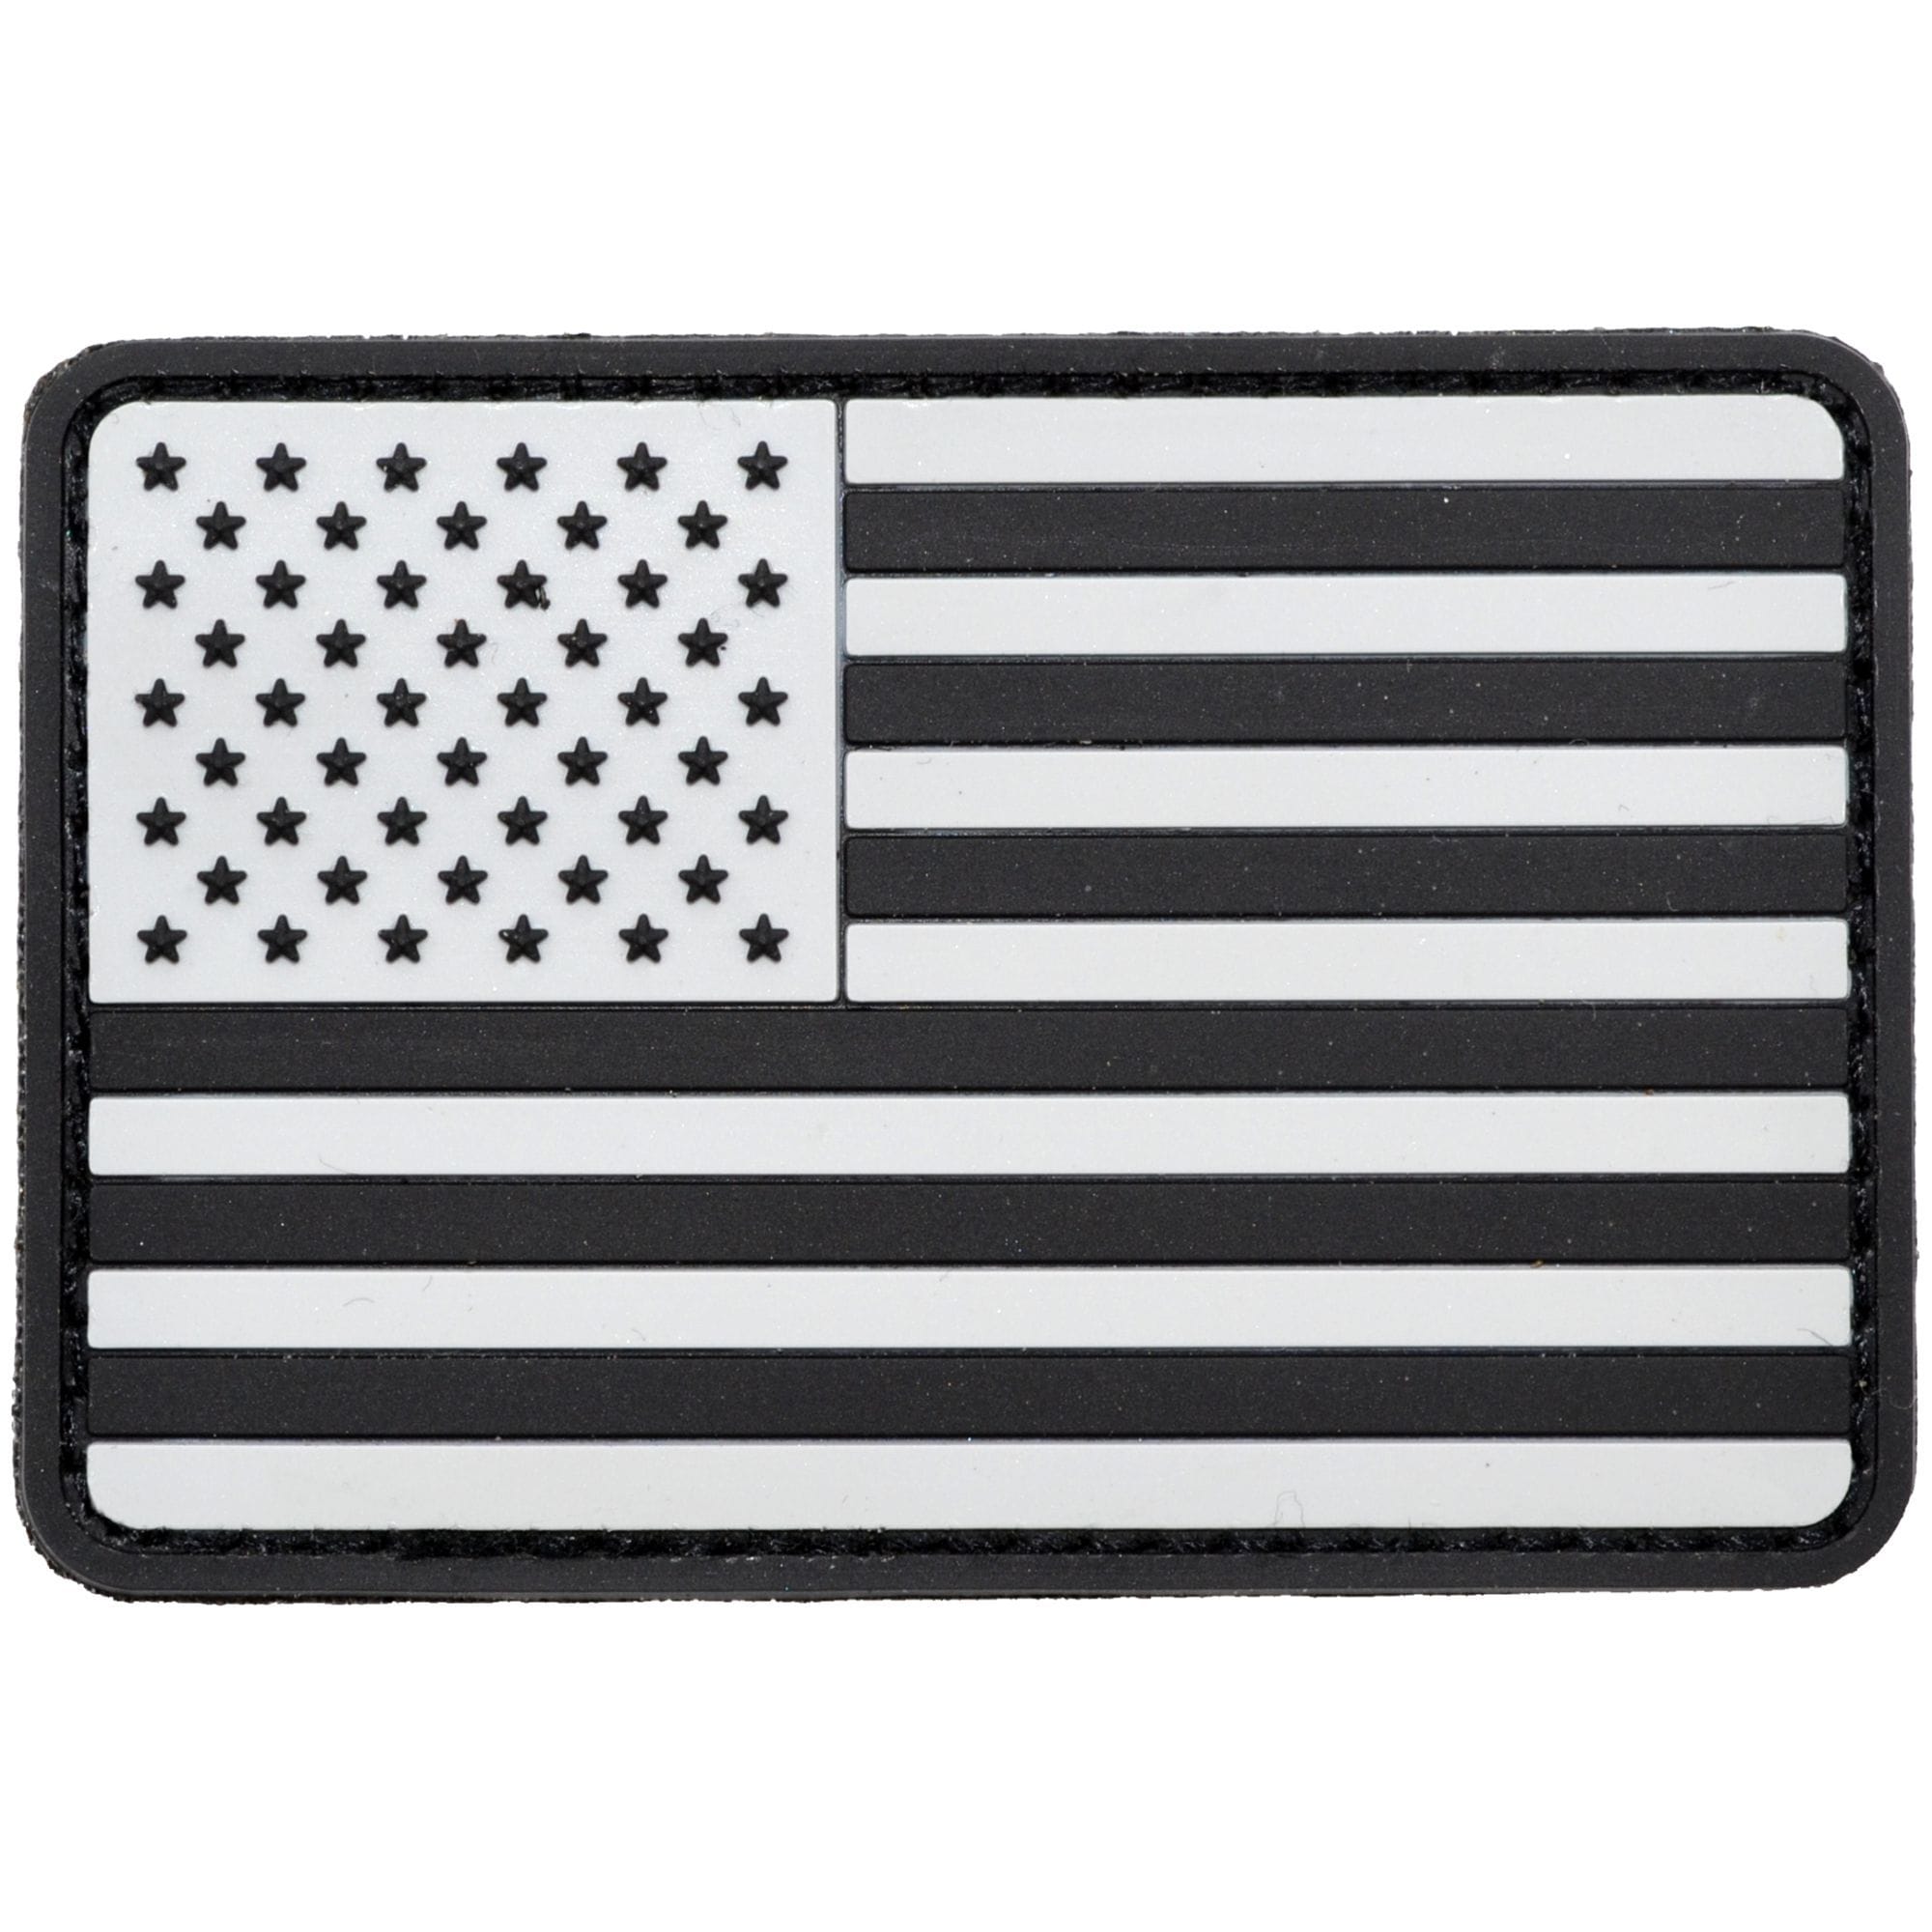 Tactical Gear Junkie Patches Black US Flag - Rounded Corners - PVC Patch